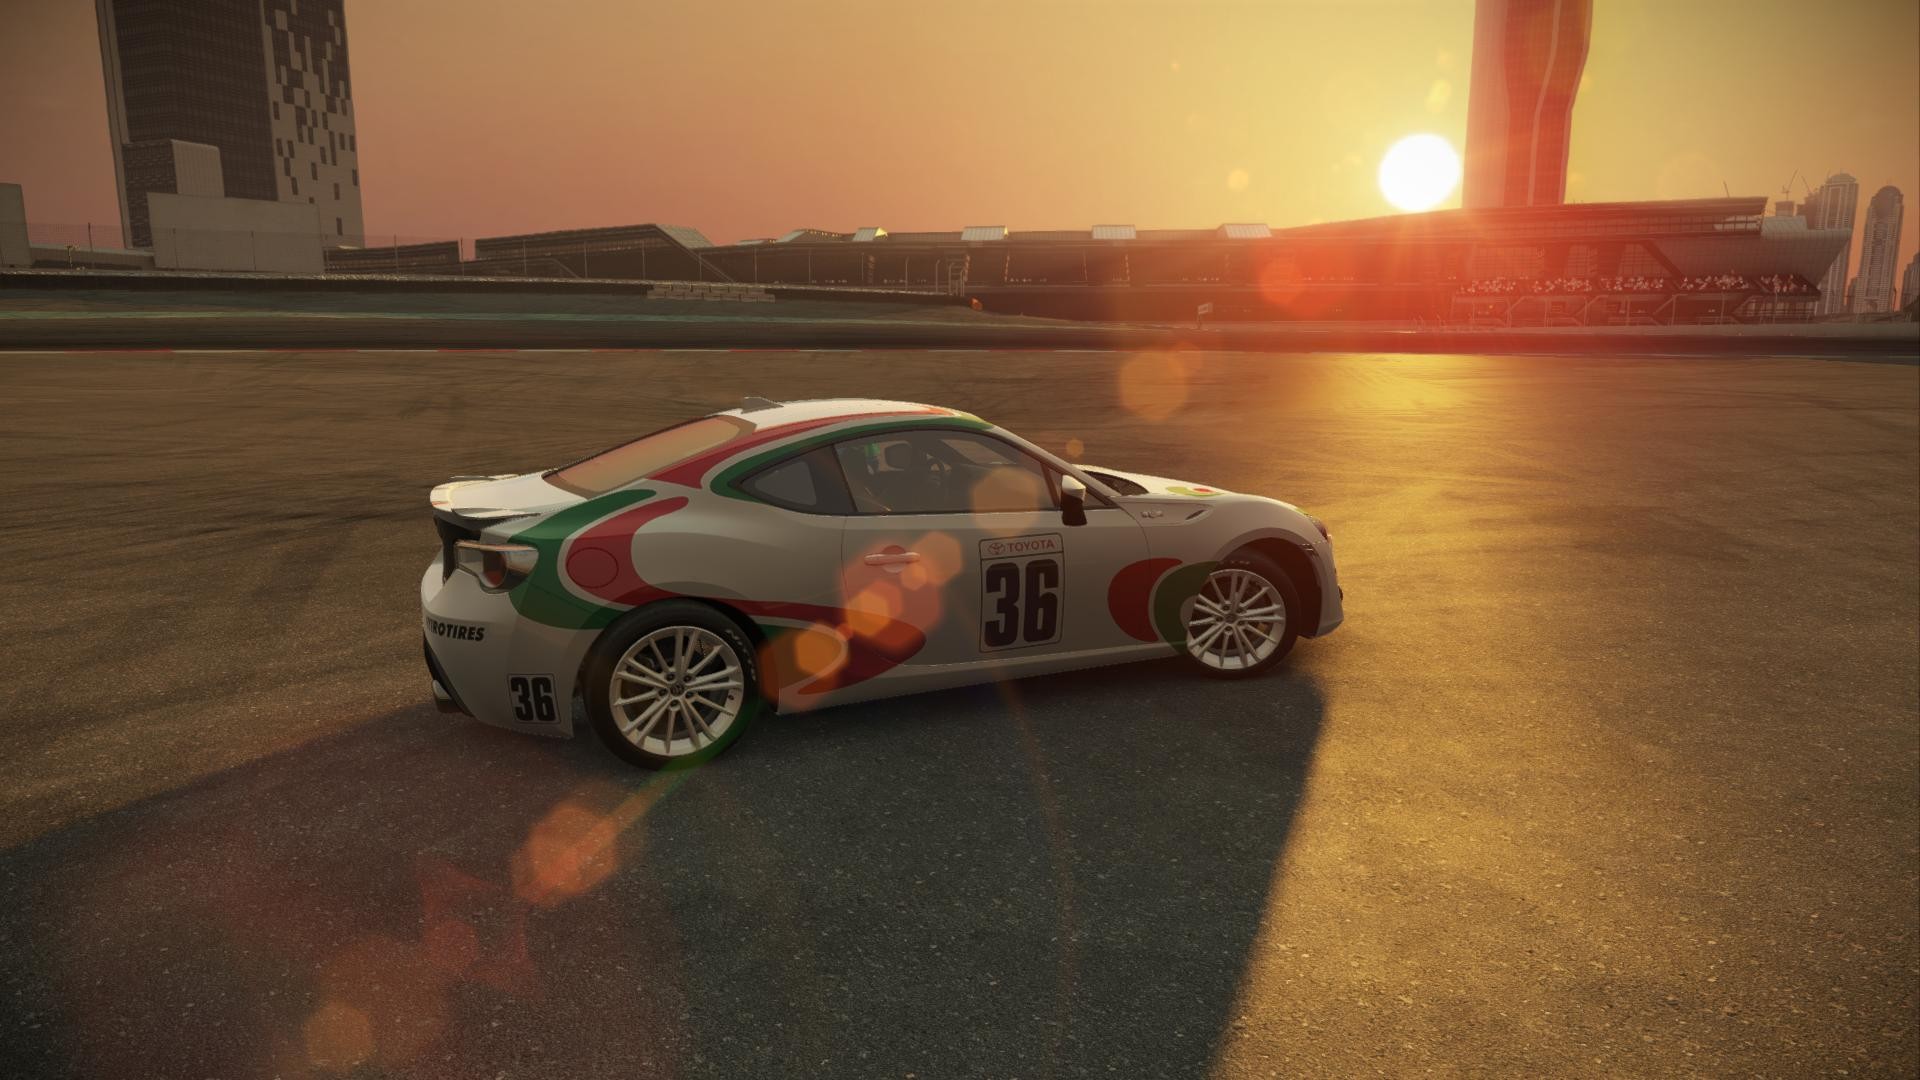 General 1920x1080 Project cars Castrol livery Toyota Toyobaru video games car screen shot white cars PC gaming vehicle